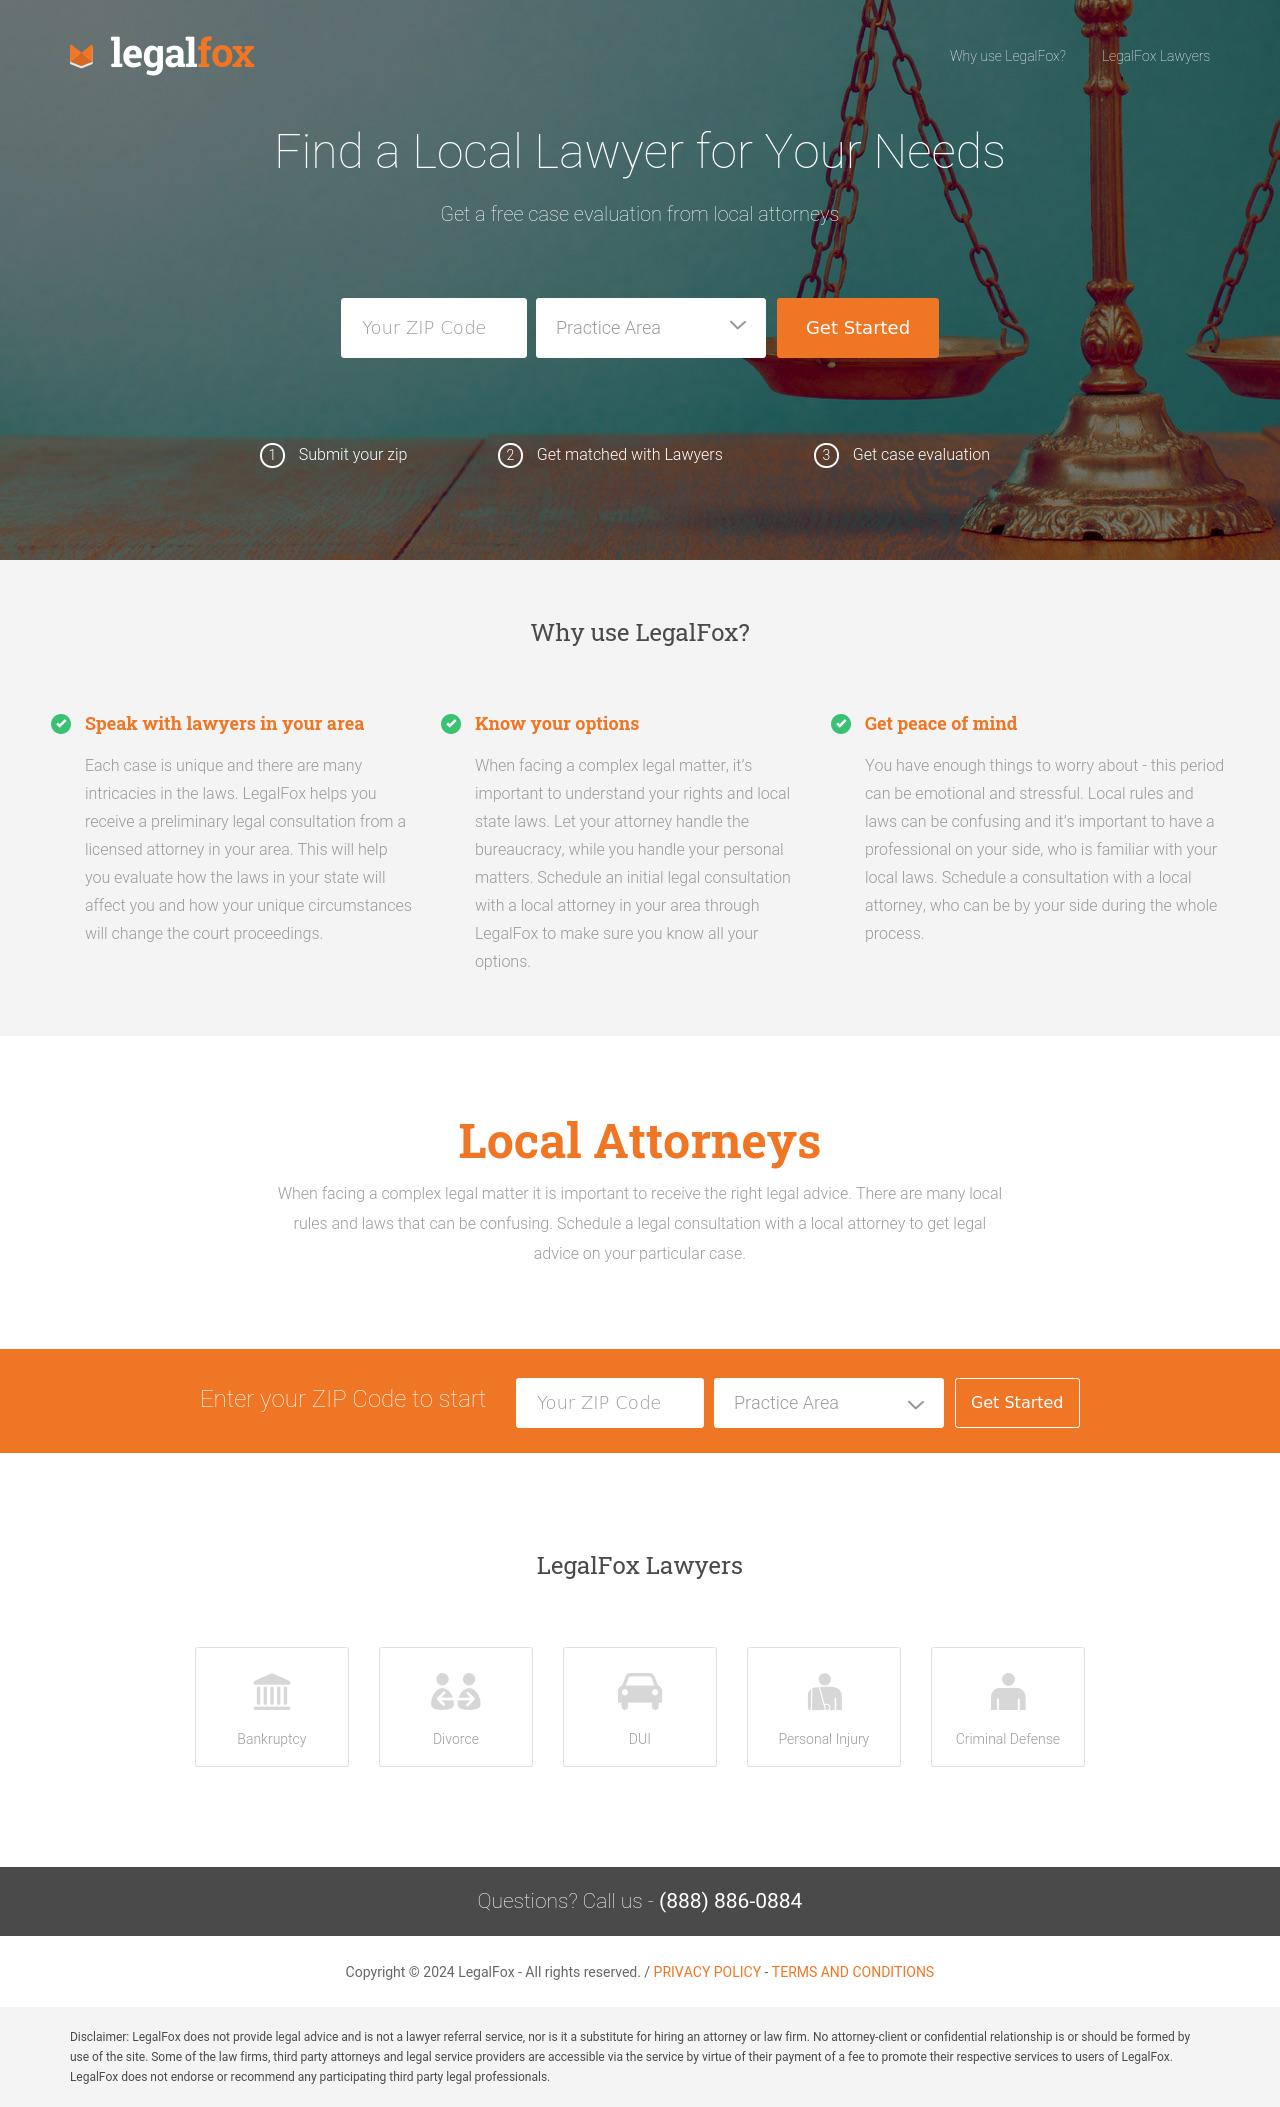 Find a Local Attorney - Madison WI Lawyers